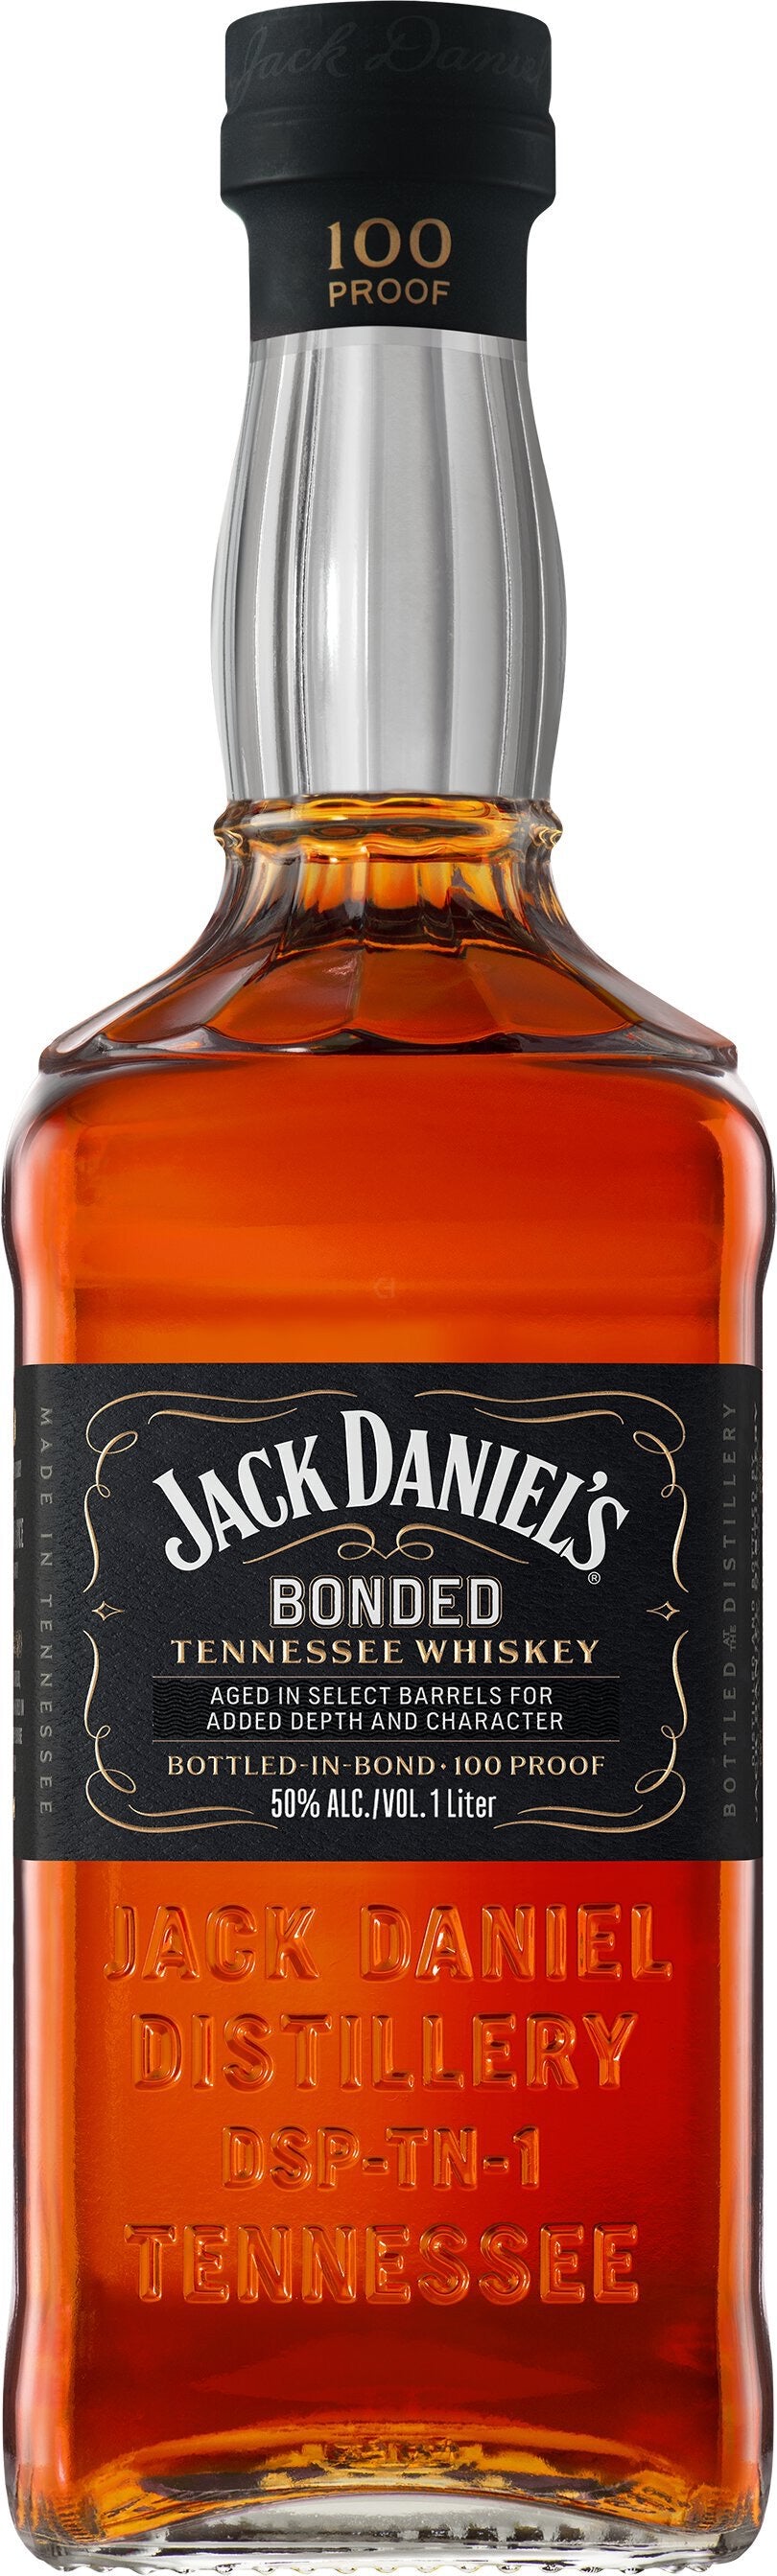 Jack Daniels Bottled In Bond Travelers Exclusive Limited Edition Tennessee  Whiskey 1lt Bottle